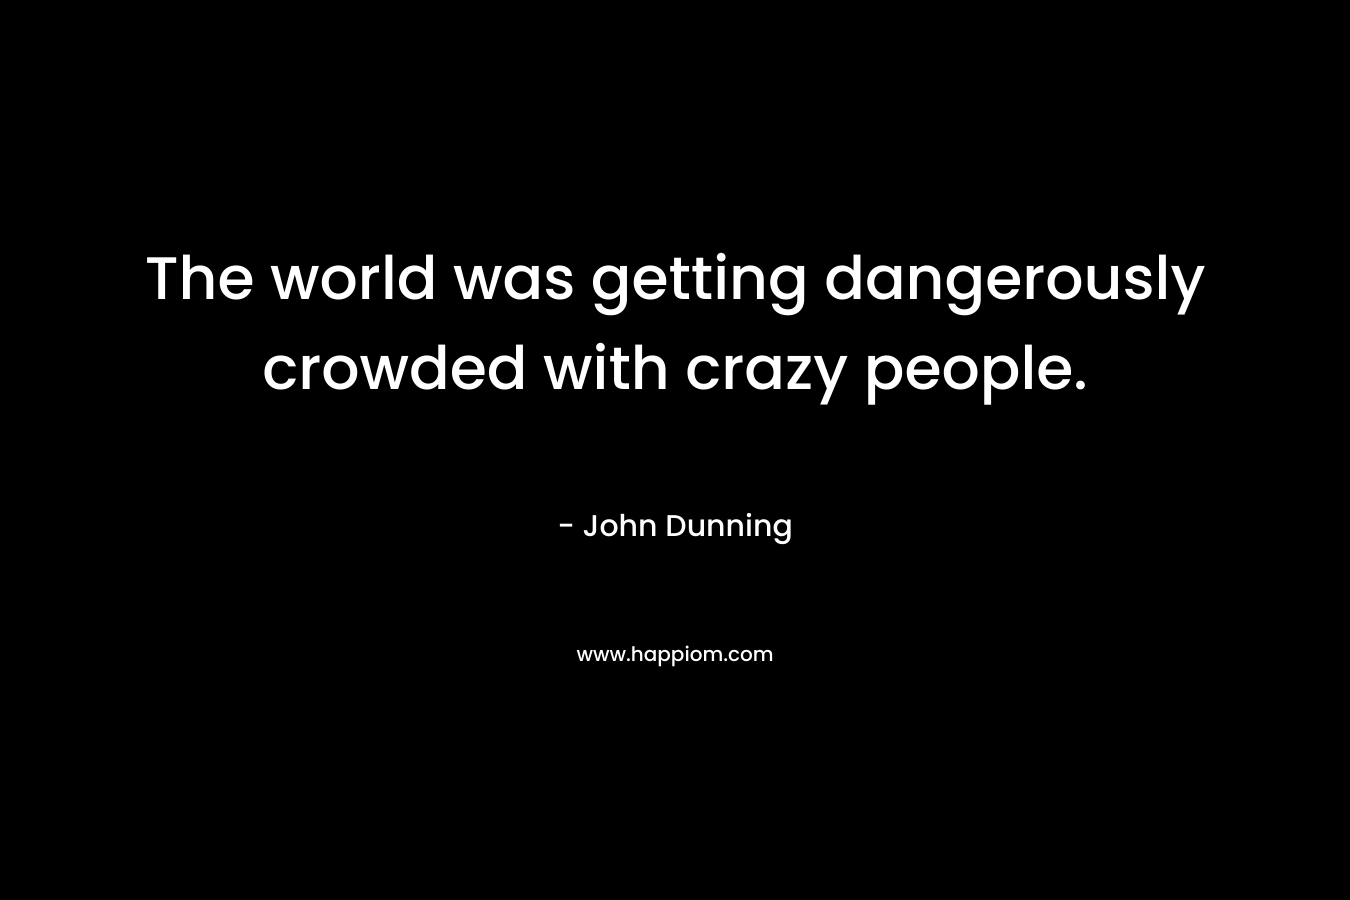 The world was getting dangerously crowded with crazy people. – John Dunning